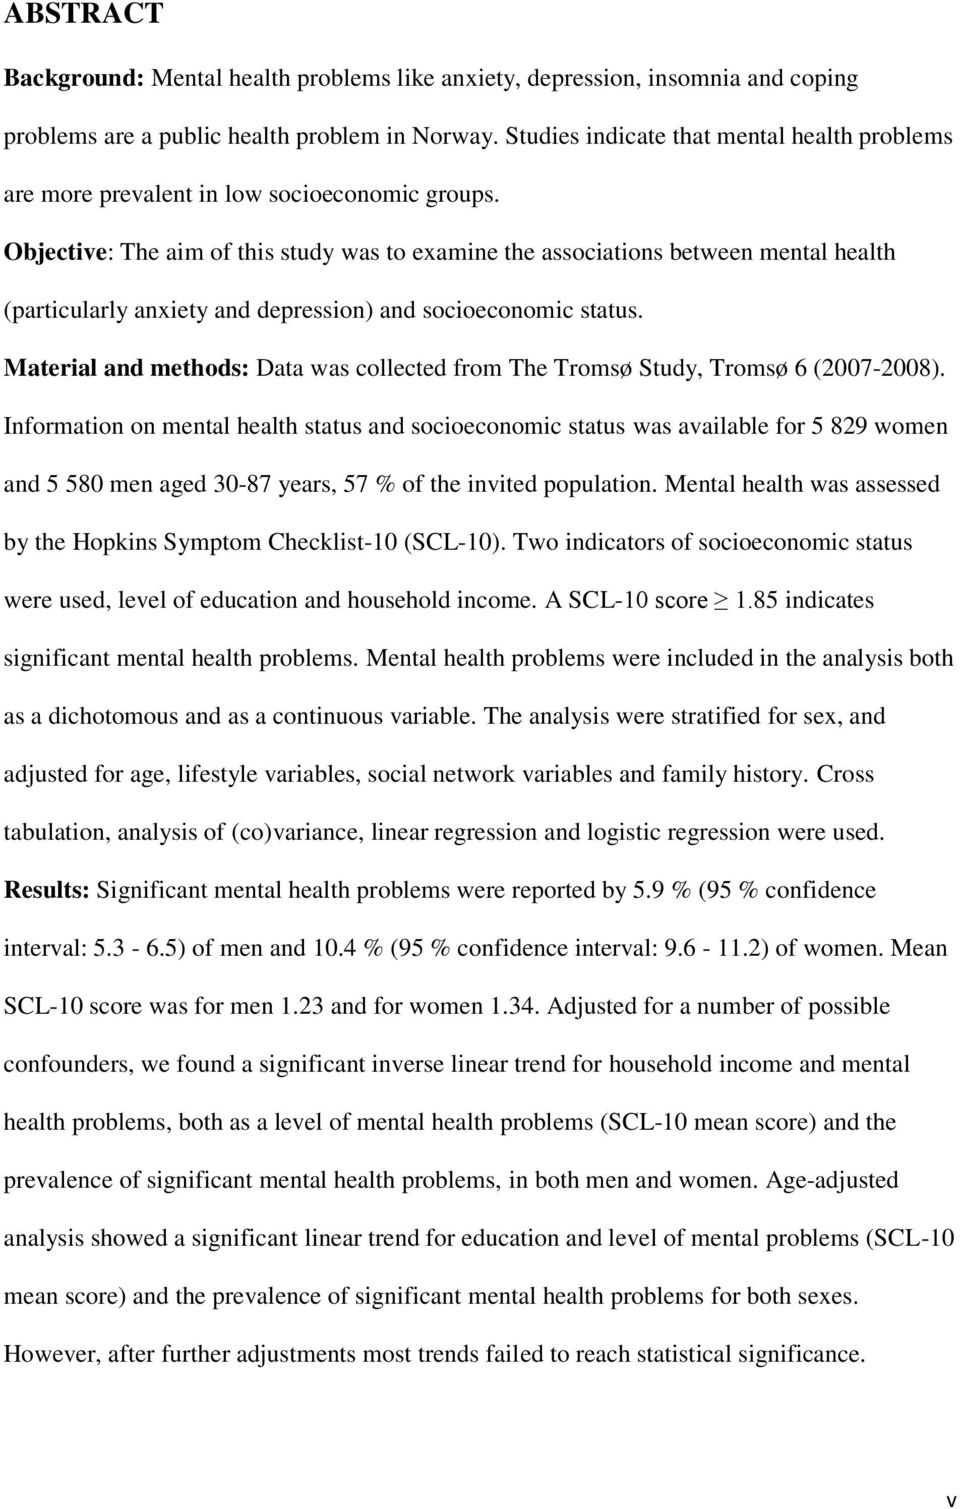 Objective: The aim of this study was to examine the associations between mental health (particularly anxiety and depression) and socioeconomic status.